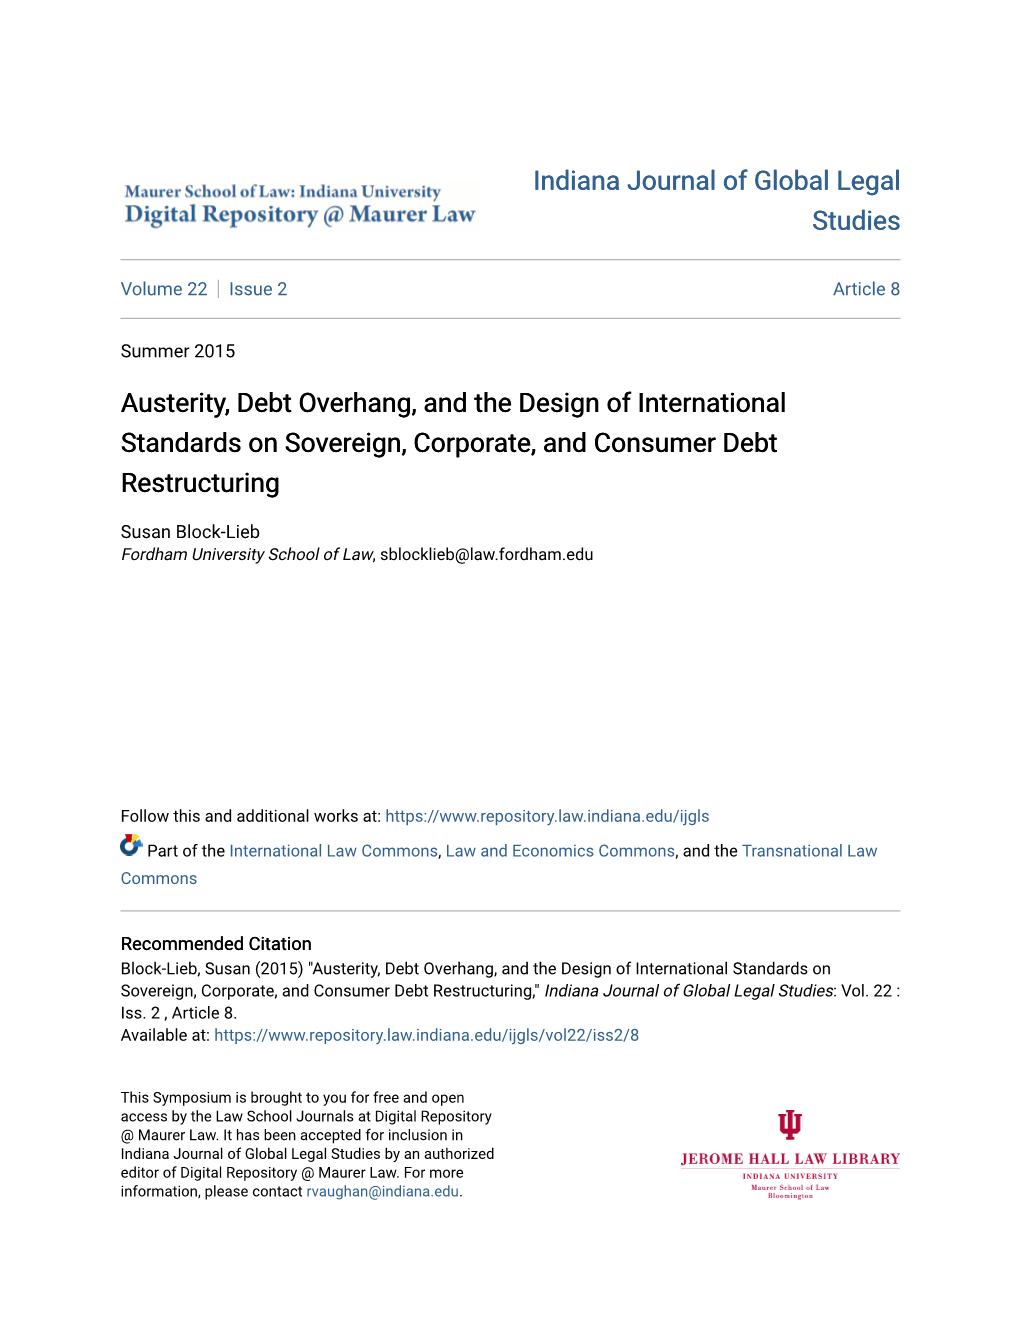 Austerity, Debt Overhang, and the Design of International Standards on Sovereign, Corporate, and Consumer Debt Restructuring